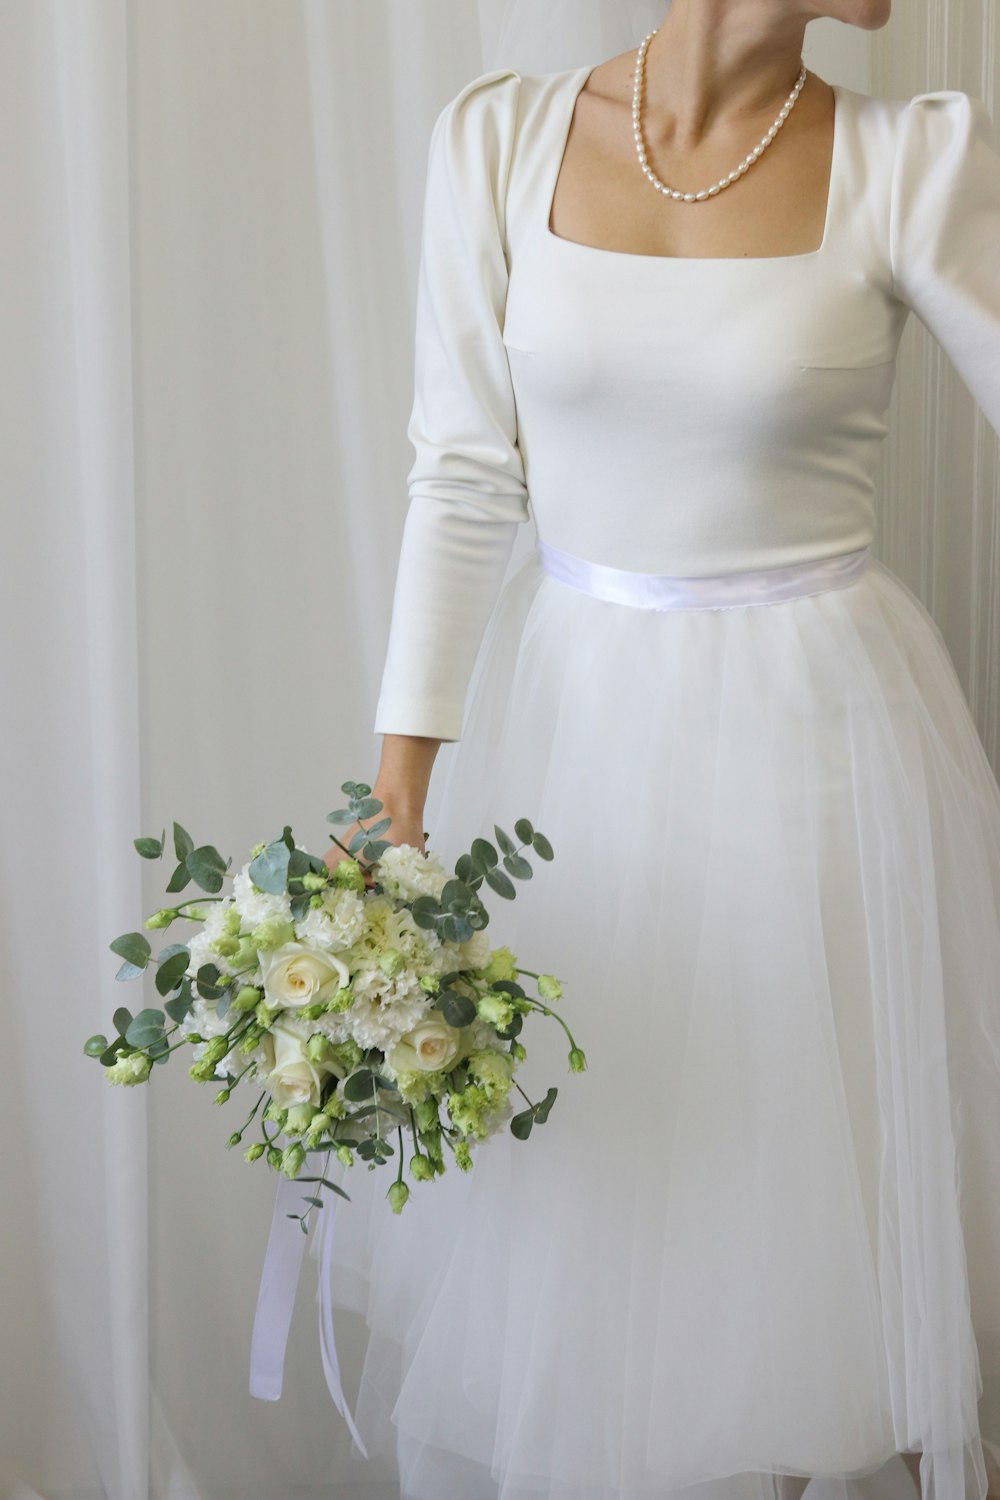 a woman wearing a white dress holding a bouquet of flowers